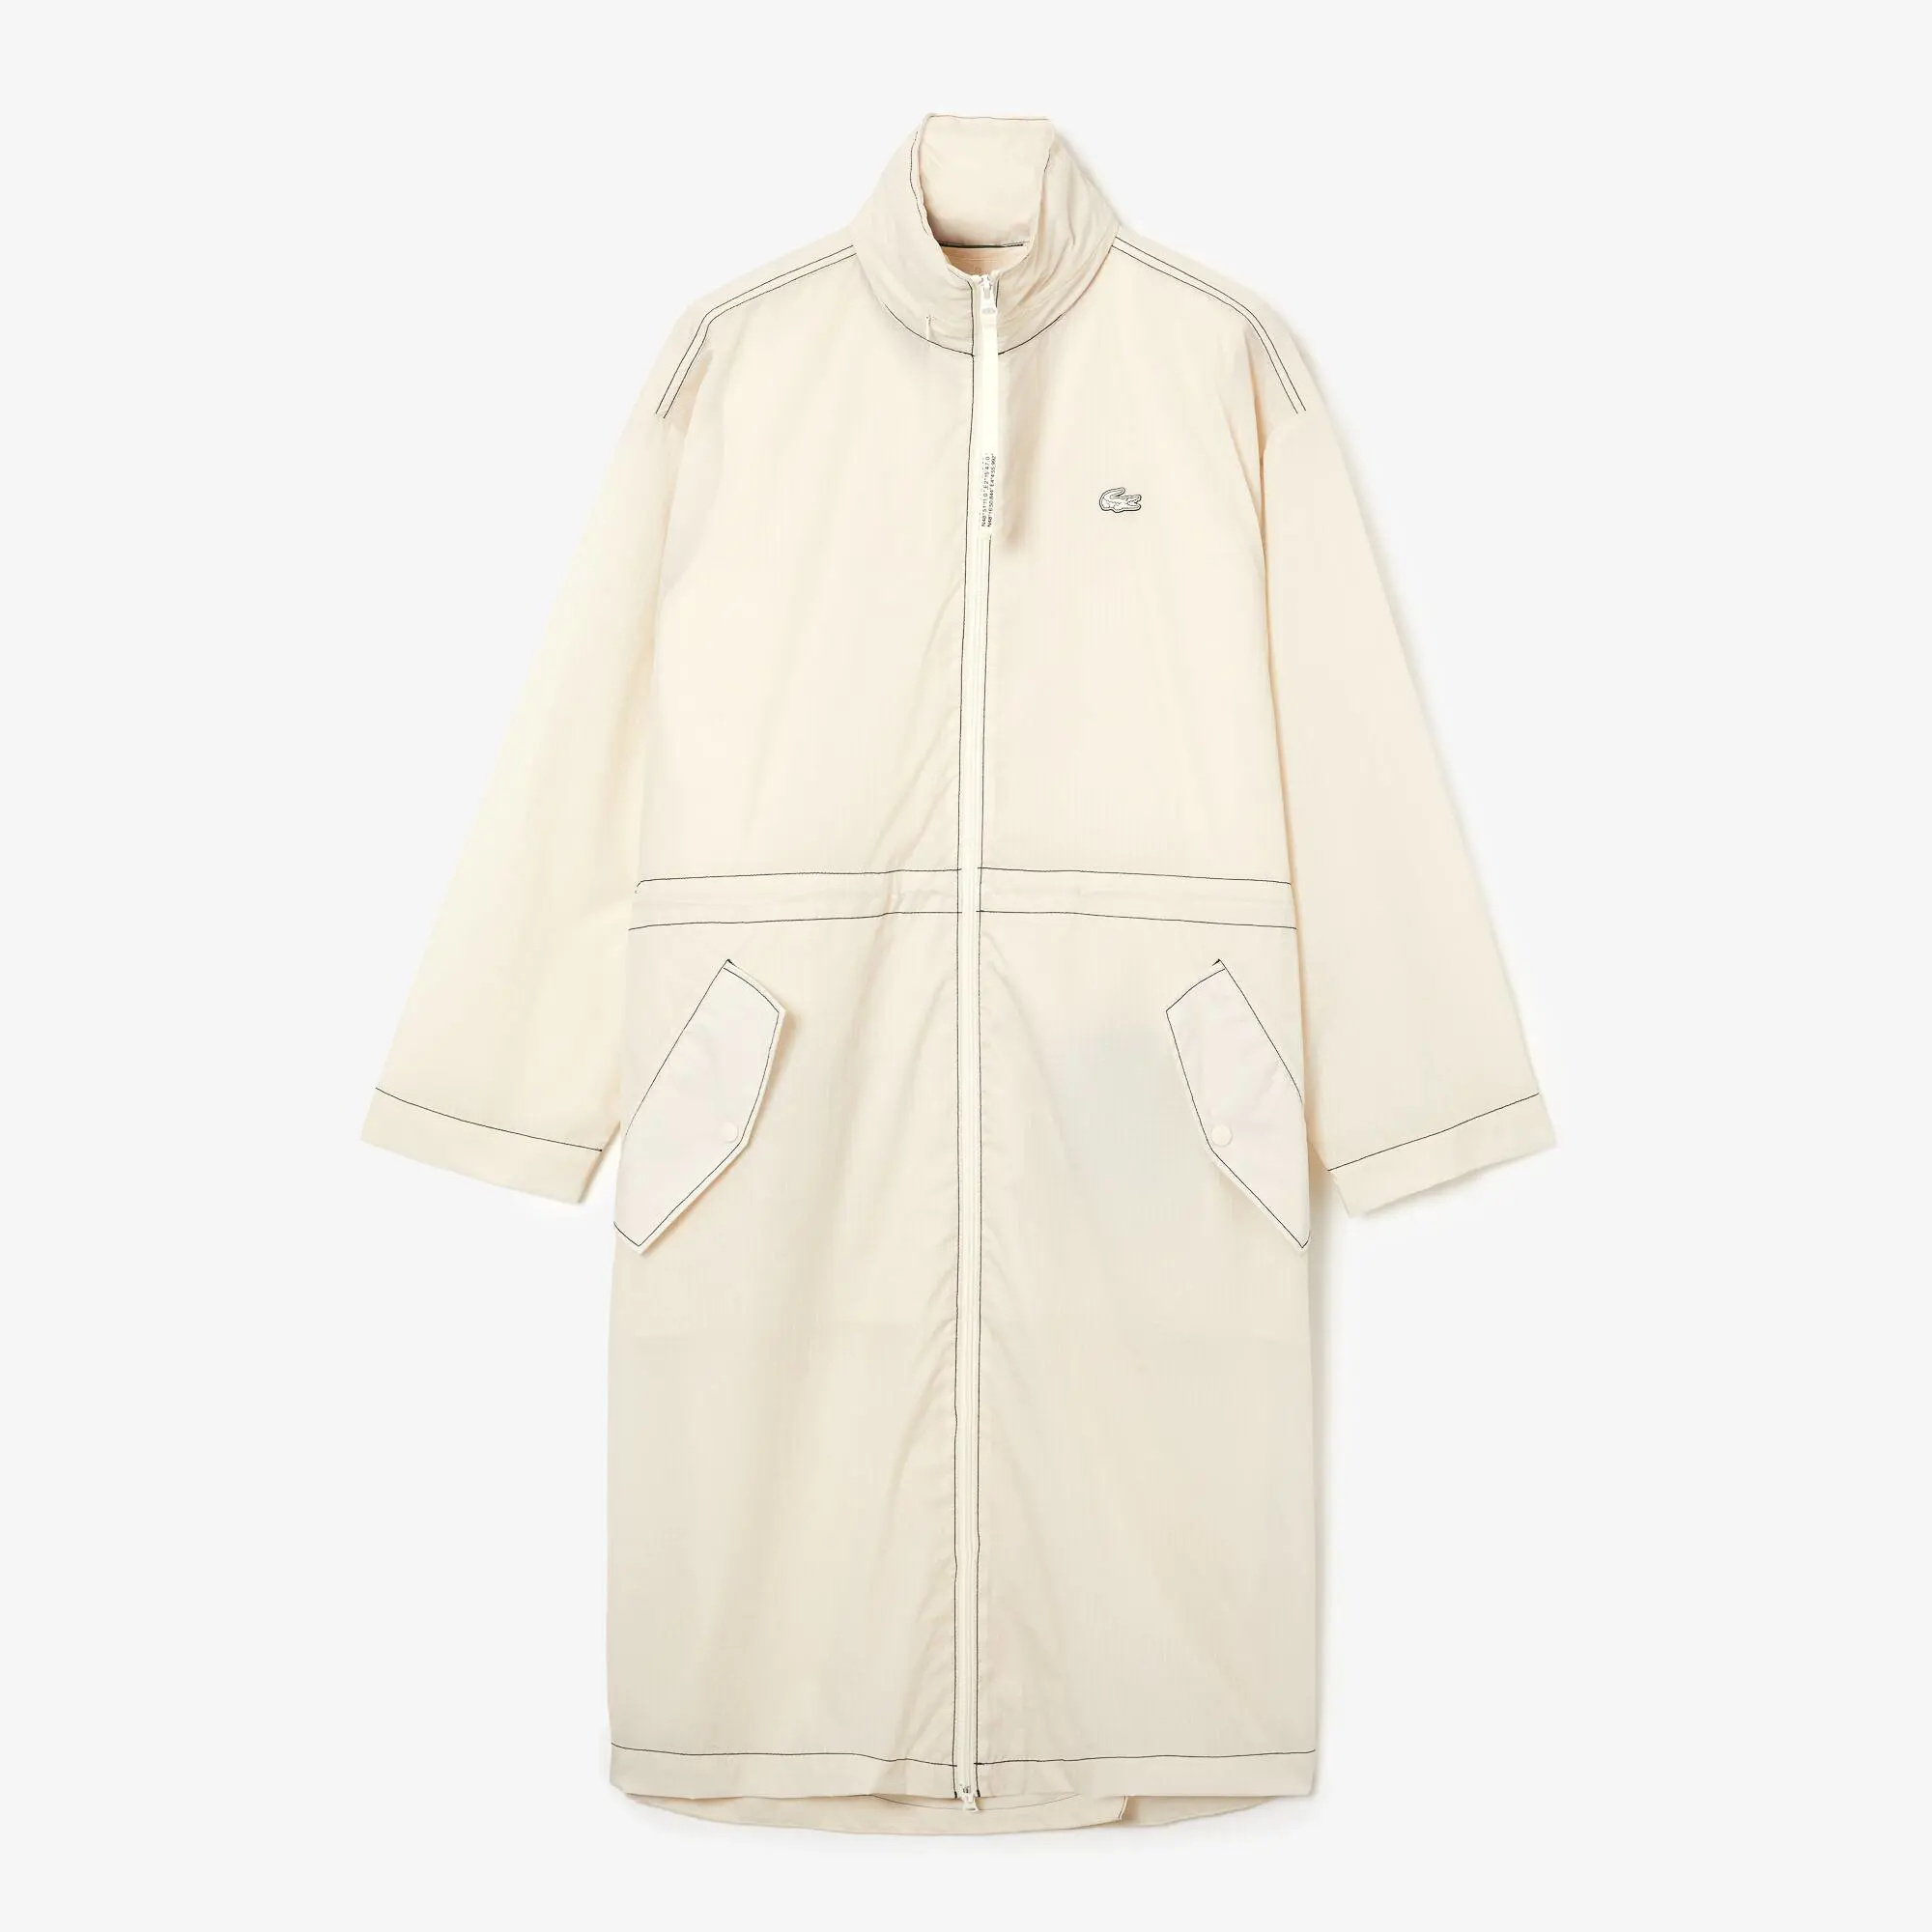 Lacoste Women’s Lacoste 2 in 1 Water-Repellant Hooded Parka. 2